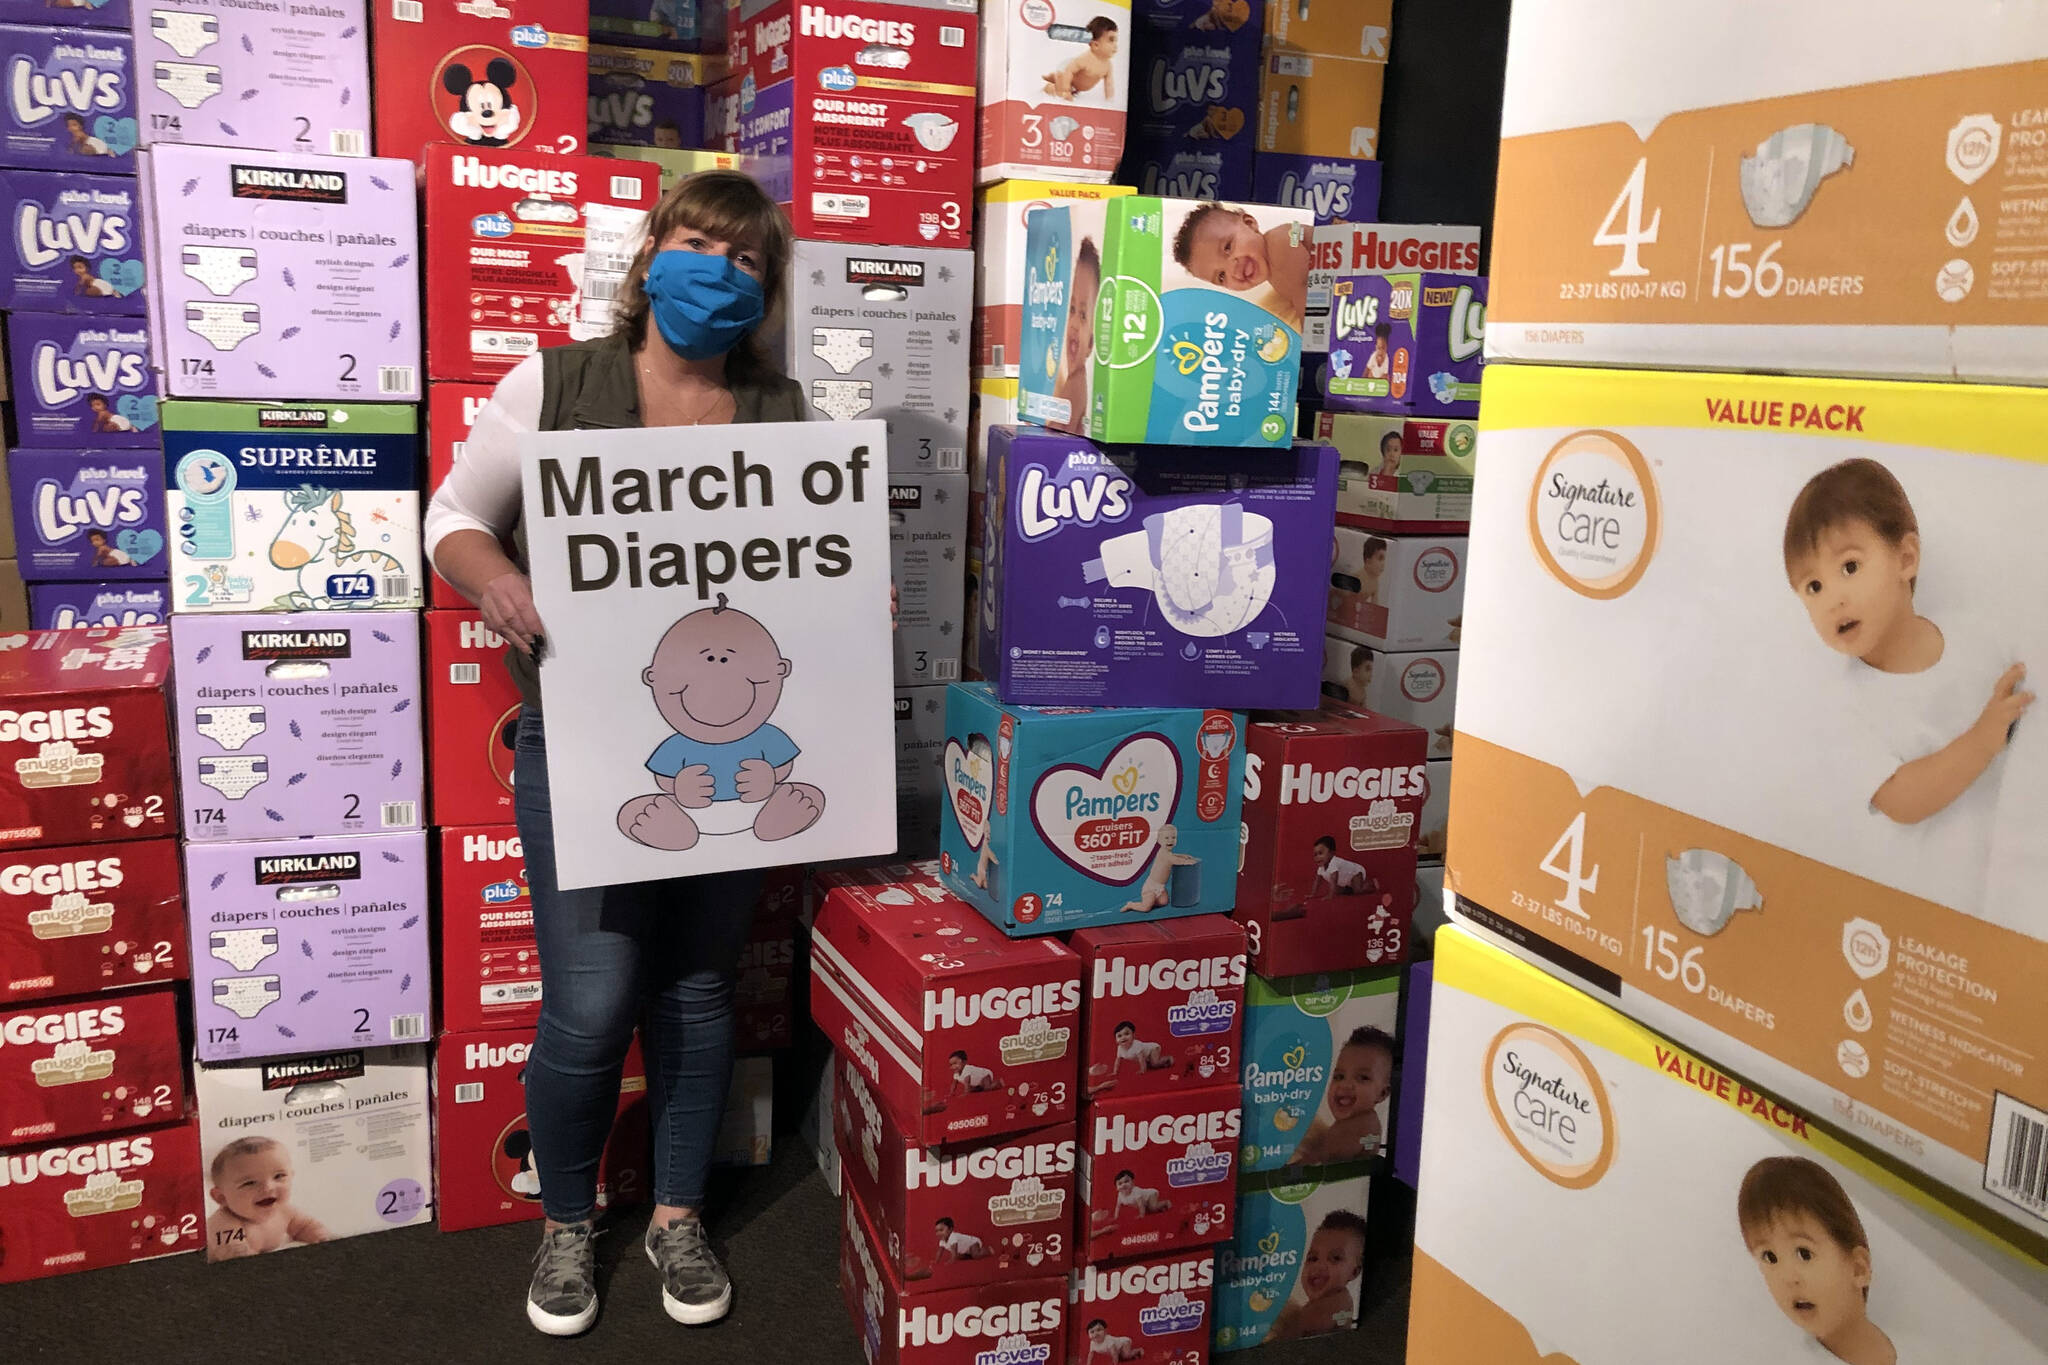 Cheryl Hurst stands among the thousands of diapers being stored at Billy McHale’s in Federal Way as part of the 2021 March of Diapers charity drive. (Sound Publishing file photo)